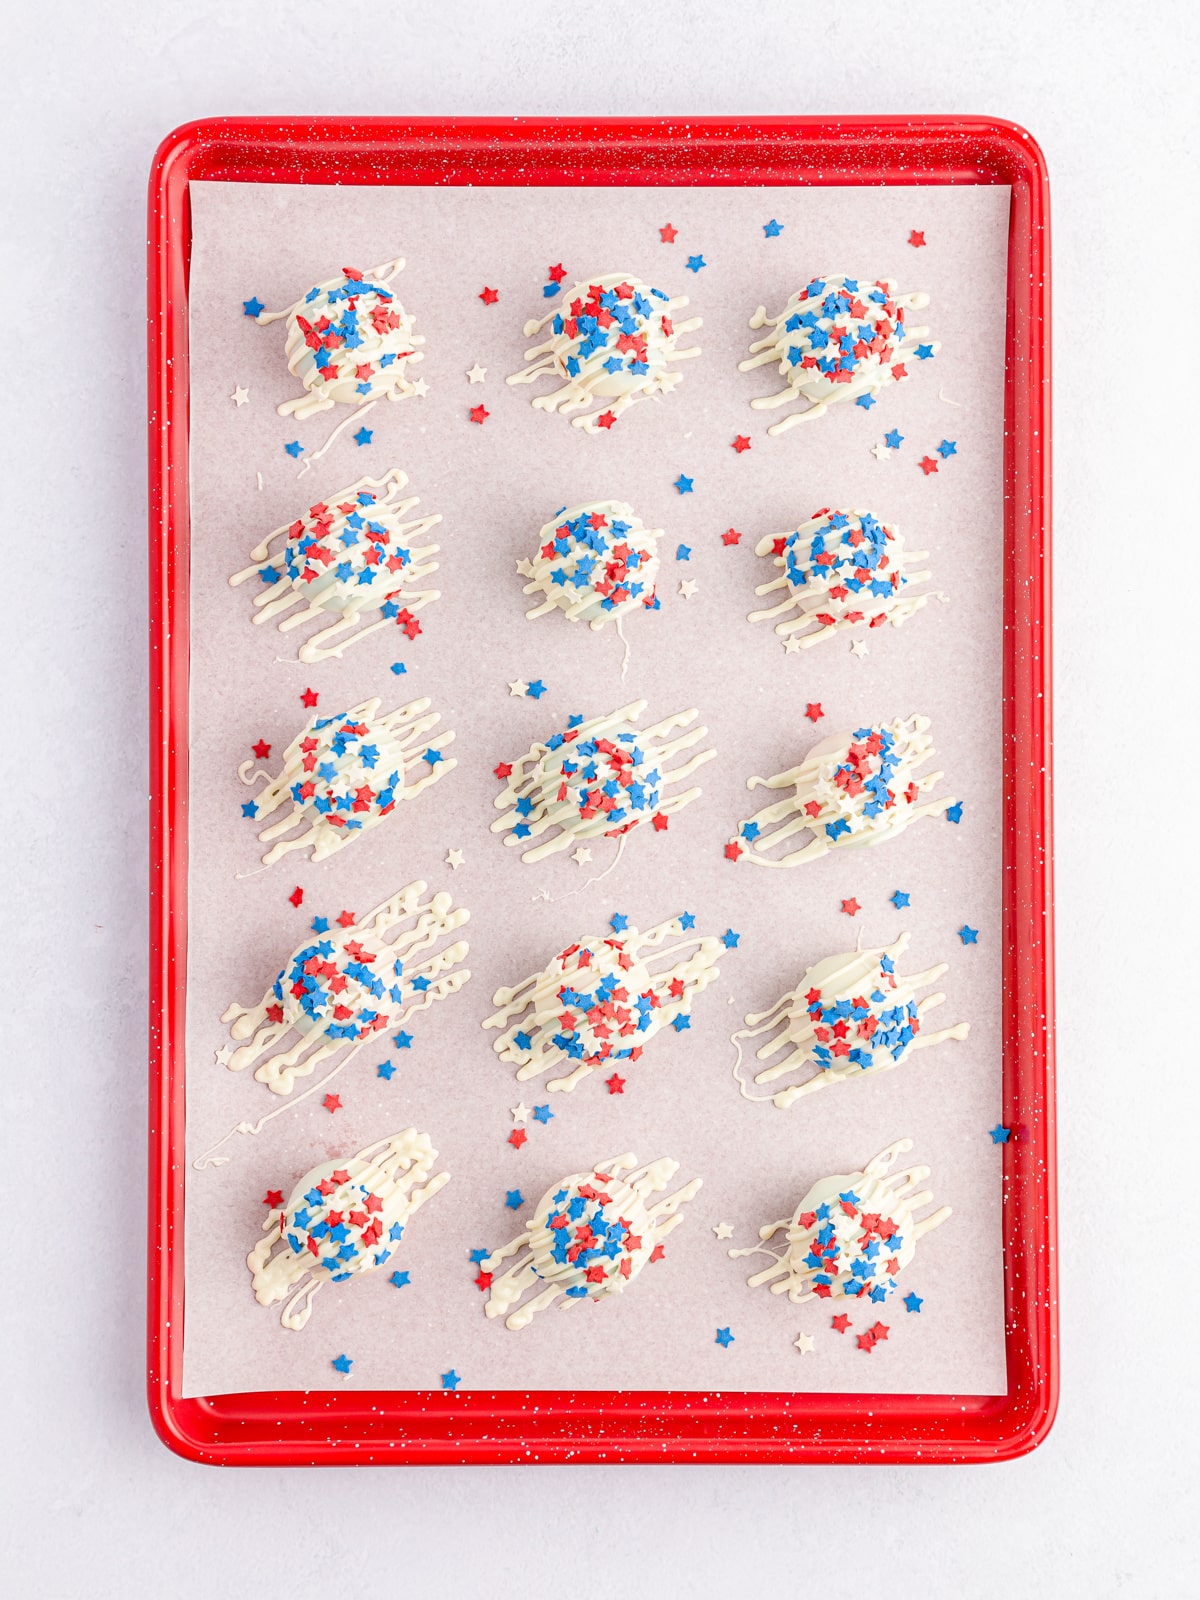 White Chocolate dipped Patriotic Cake Balls with star sprinkles